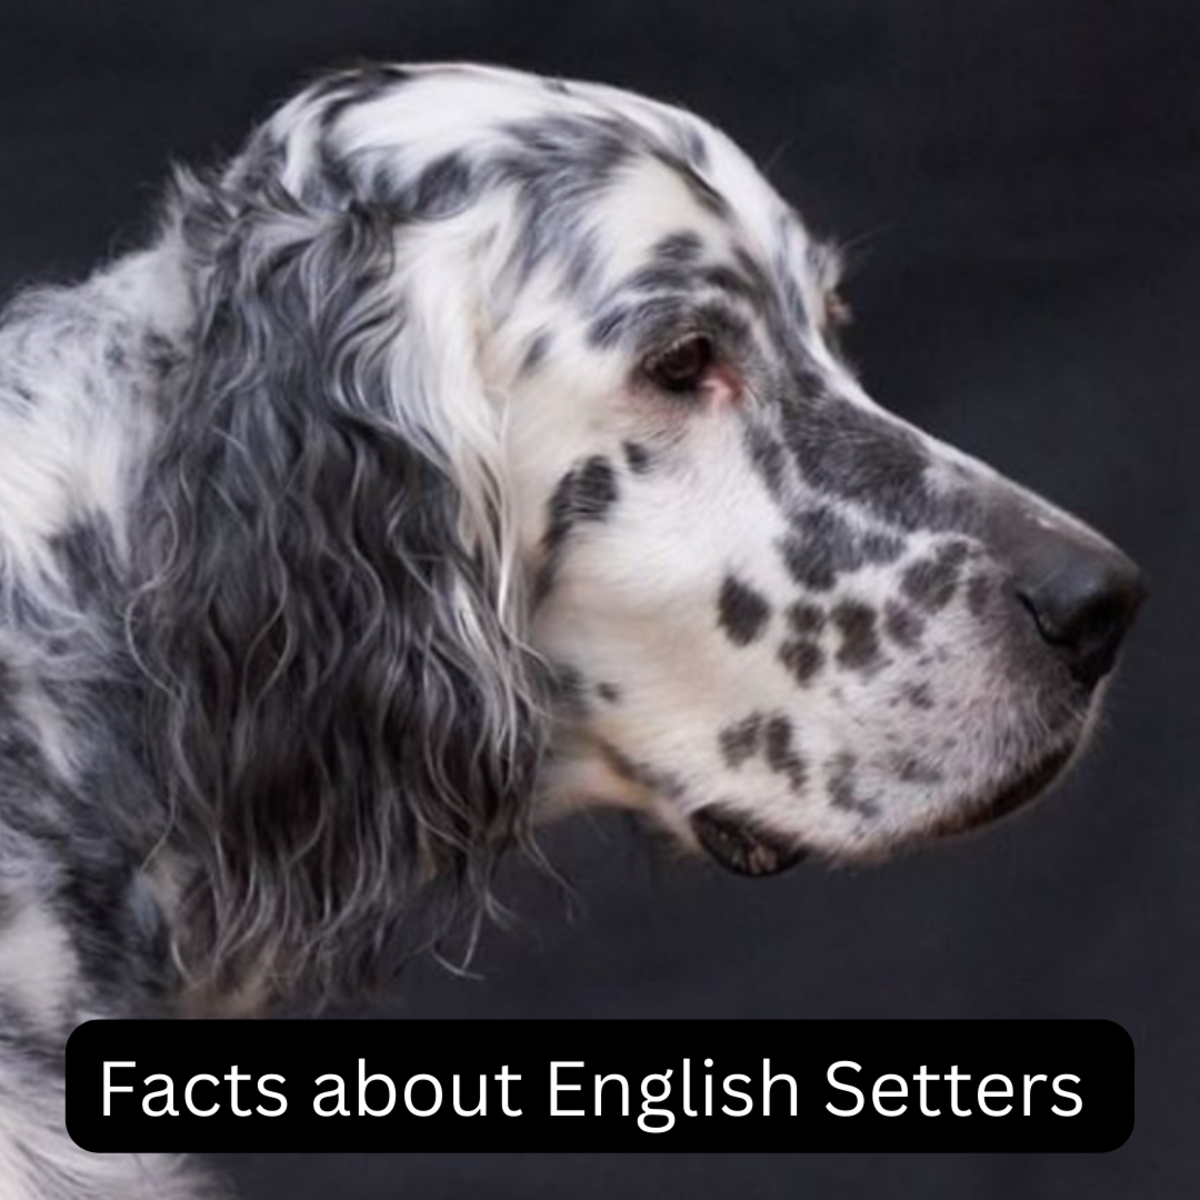 15 Facts About English Setters